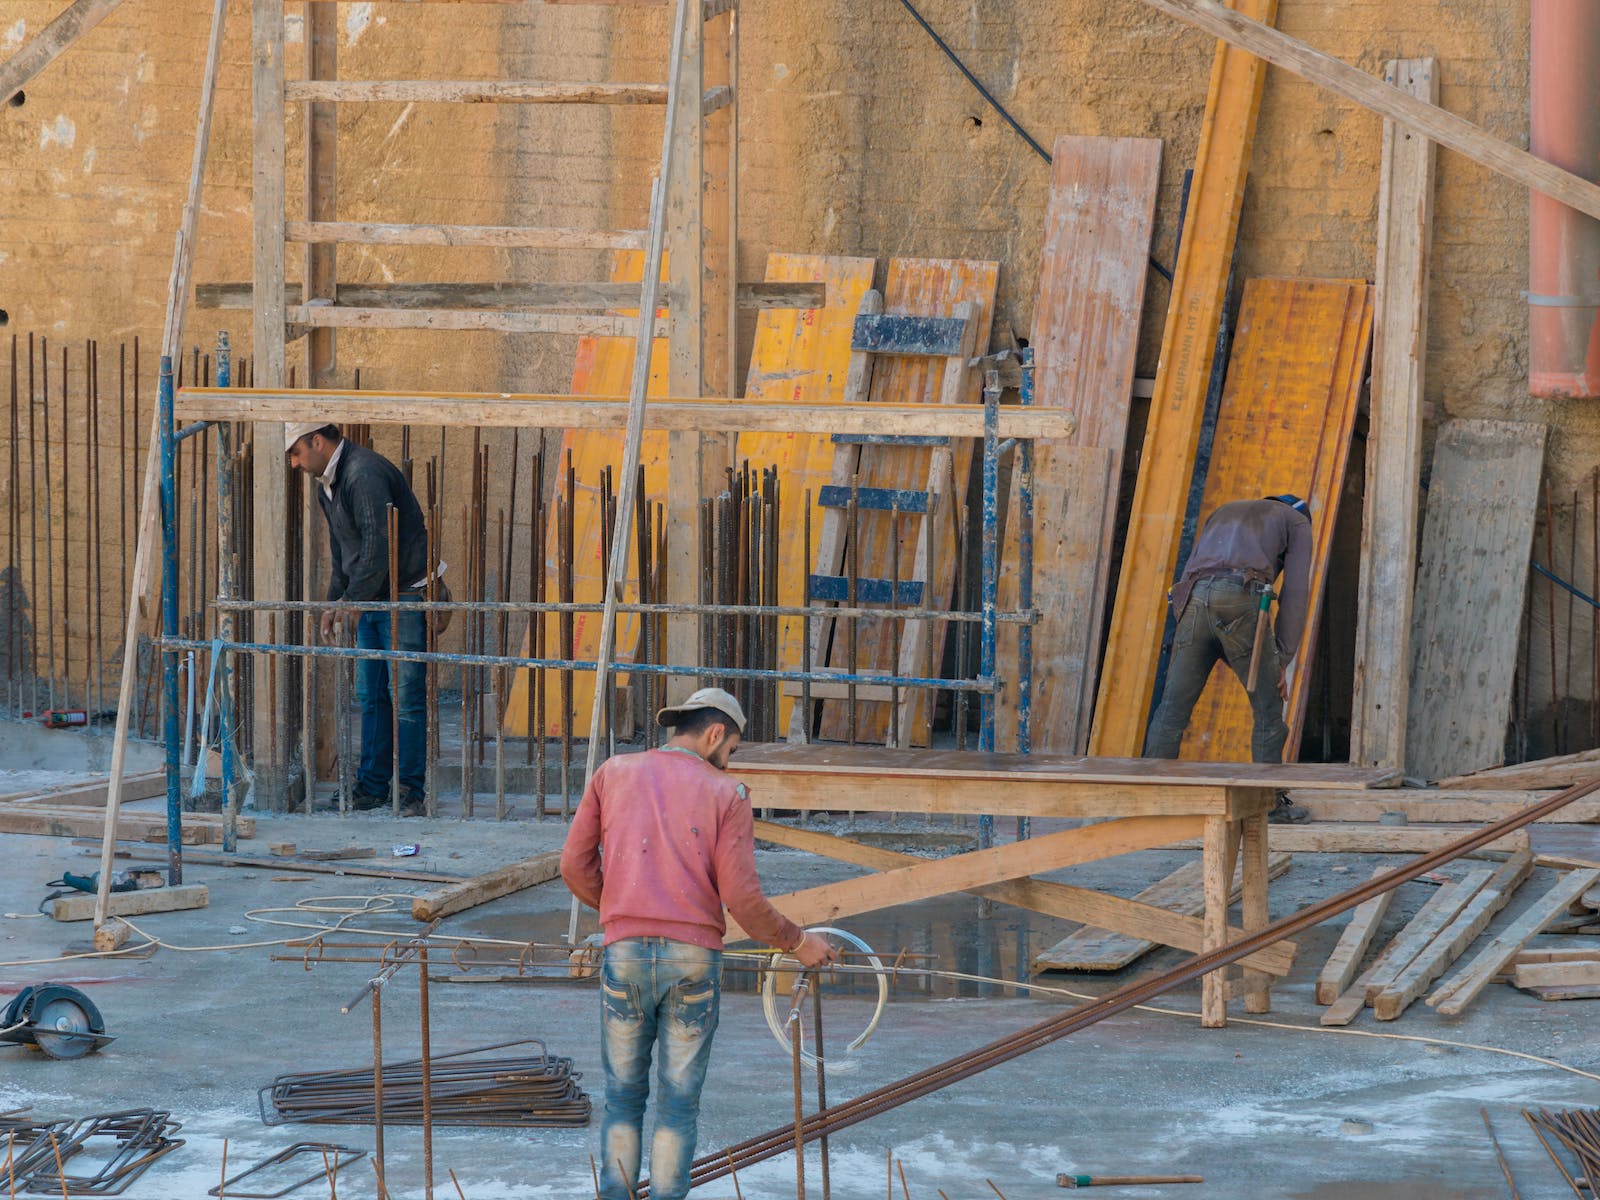 Men Working in a Building Under Construction